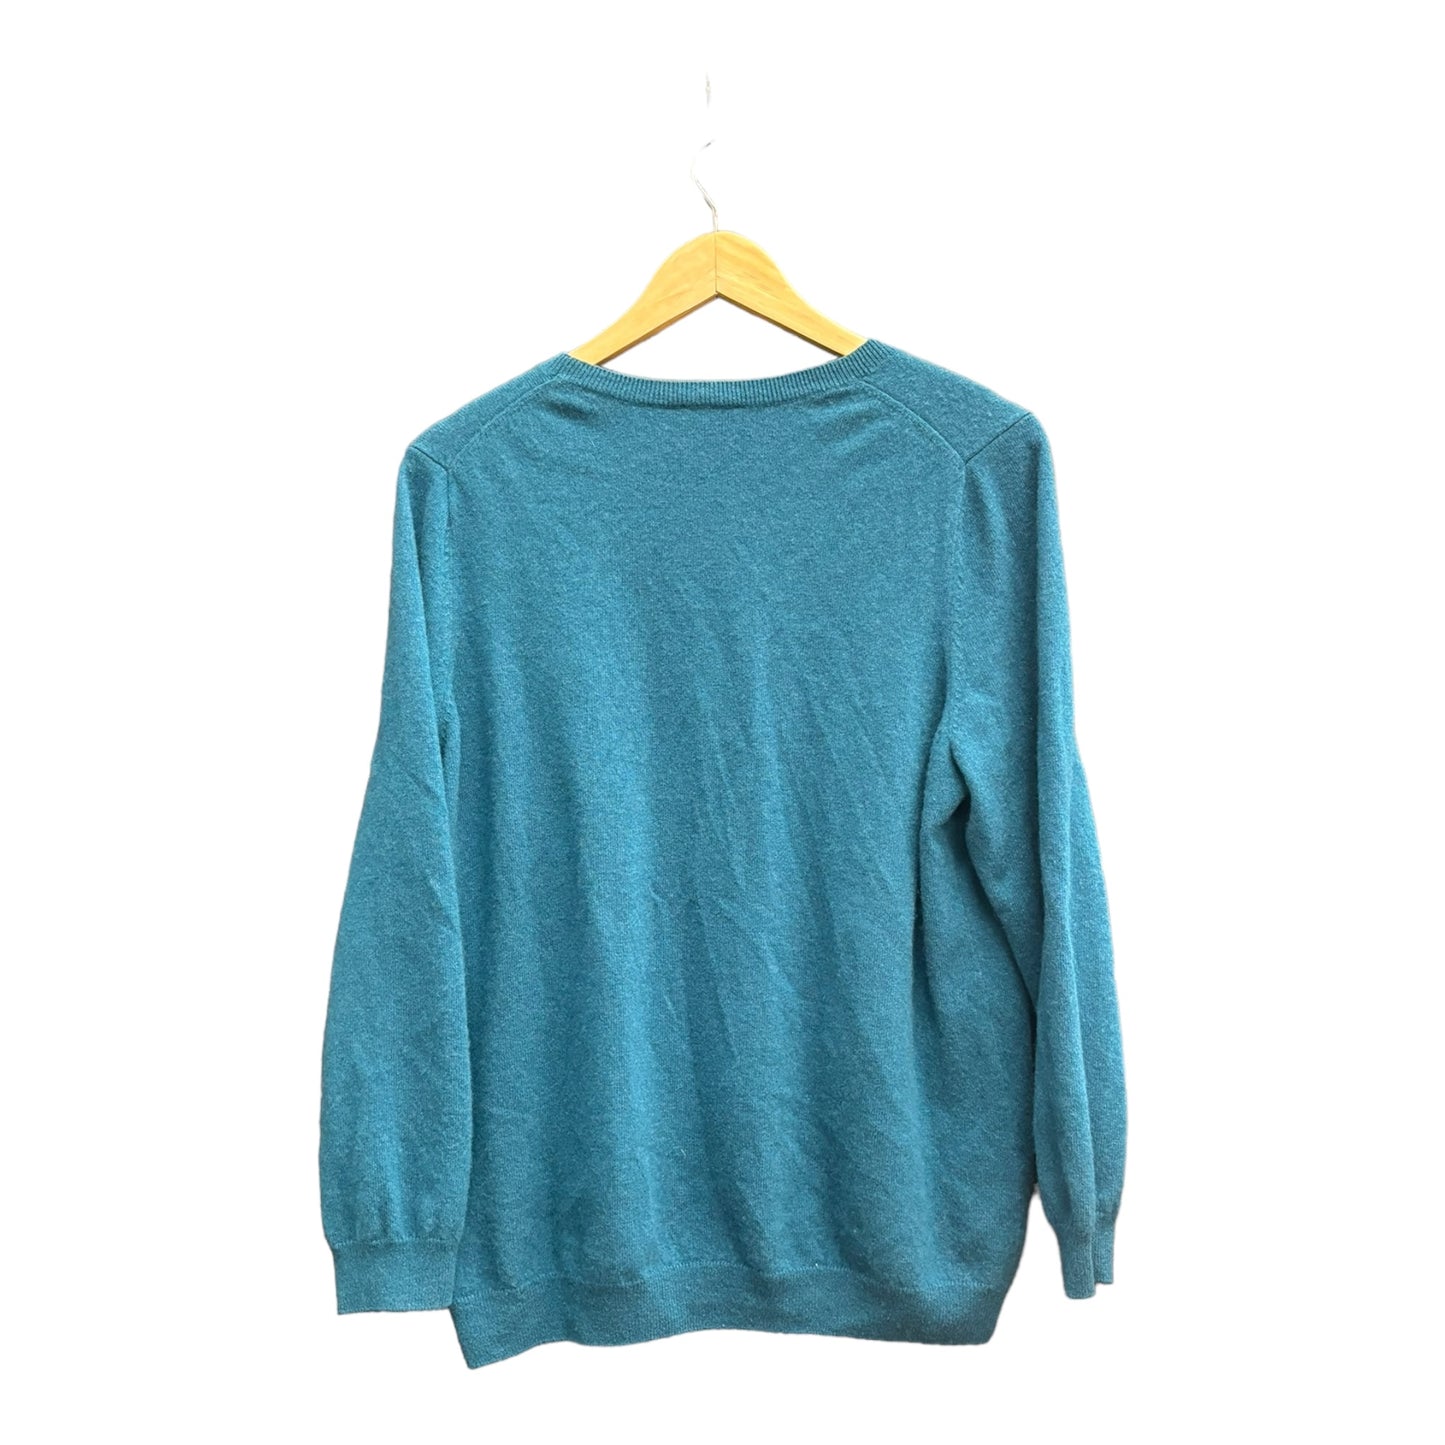 Sweater Cashmere By Talbots O  Size: 2x